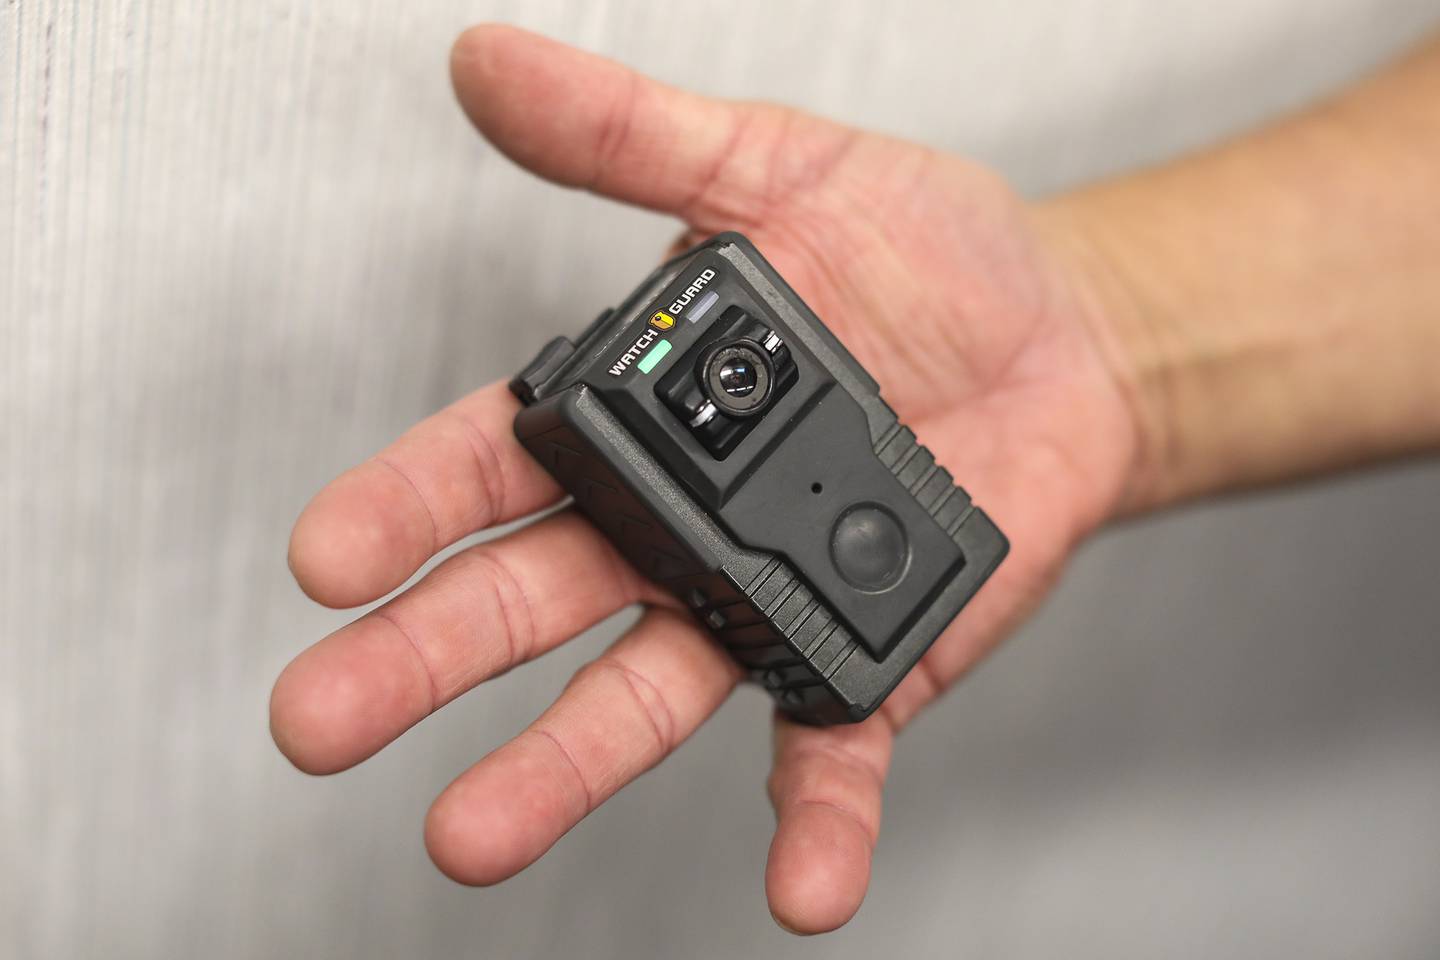 Rockdale Police Chief Robert Dykstra displays a body camera used by the Rockdale police force on Friday, March 26, 2021, at the Rockdale Police Department headquarters in Rockdale, Ill. The Rockdale Police Dept. were one of the first in the county to implement the use of body cameras.